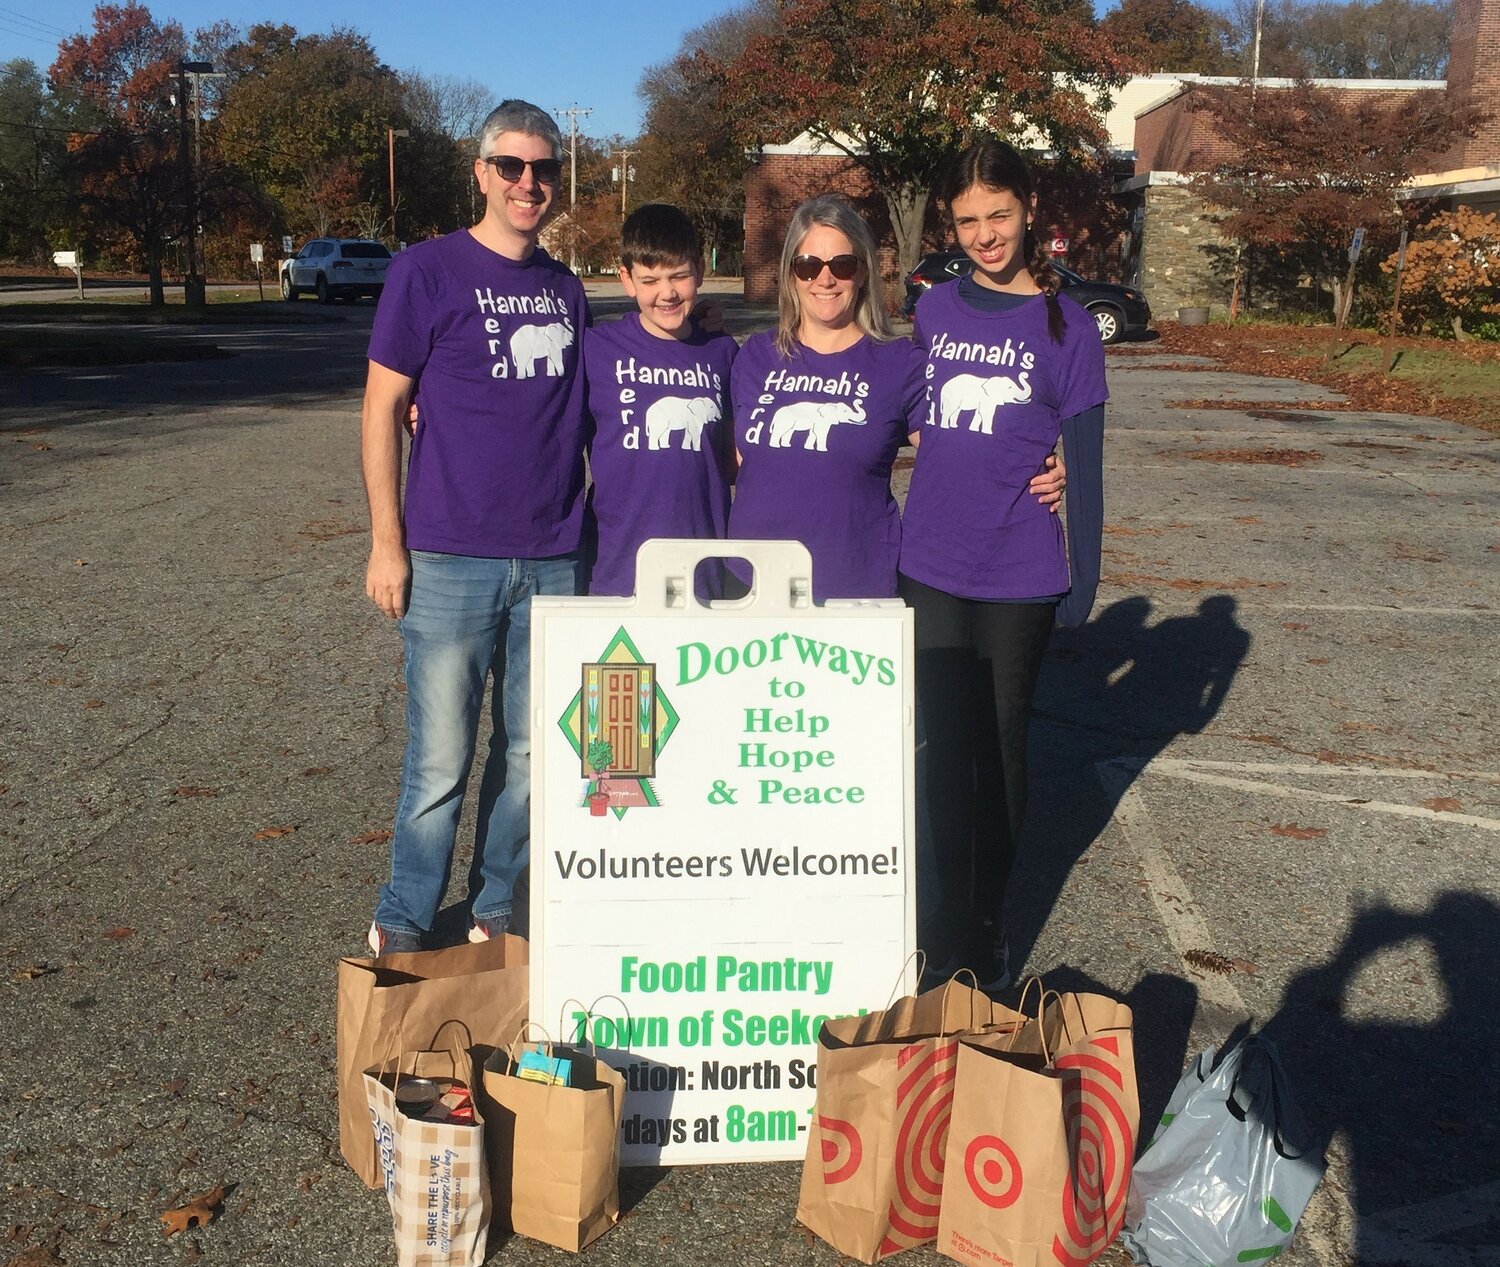 Members of the Baldassi family drop off food collected during the 3rd Annual “Hannah’s 5K Run for Charity”. This is the third year the run has collected food for Doorways.